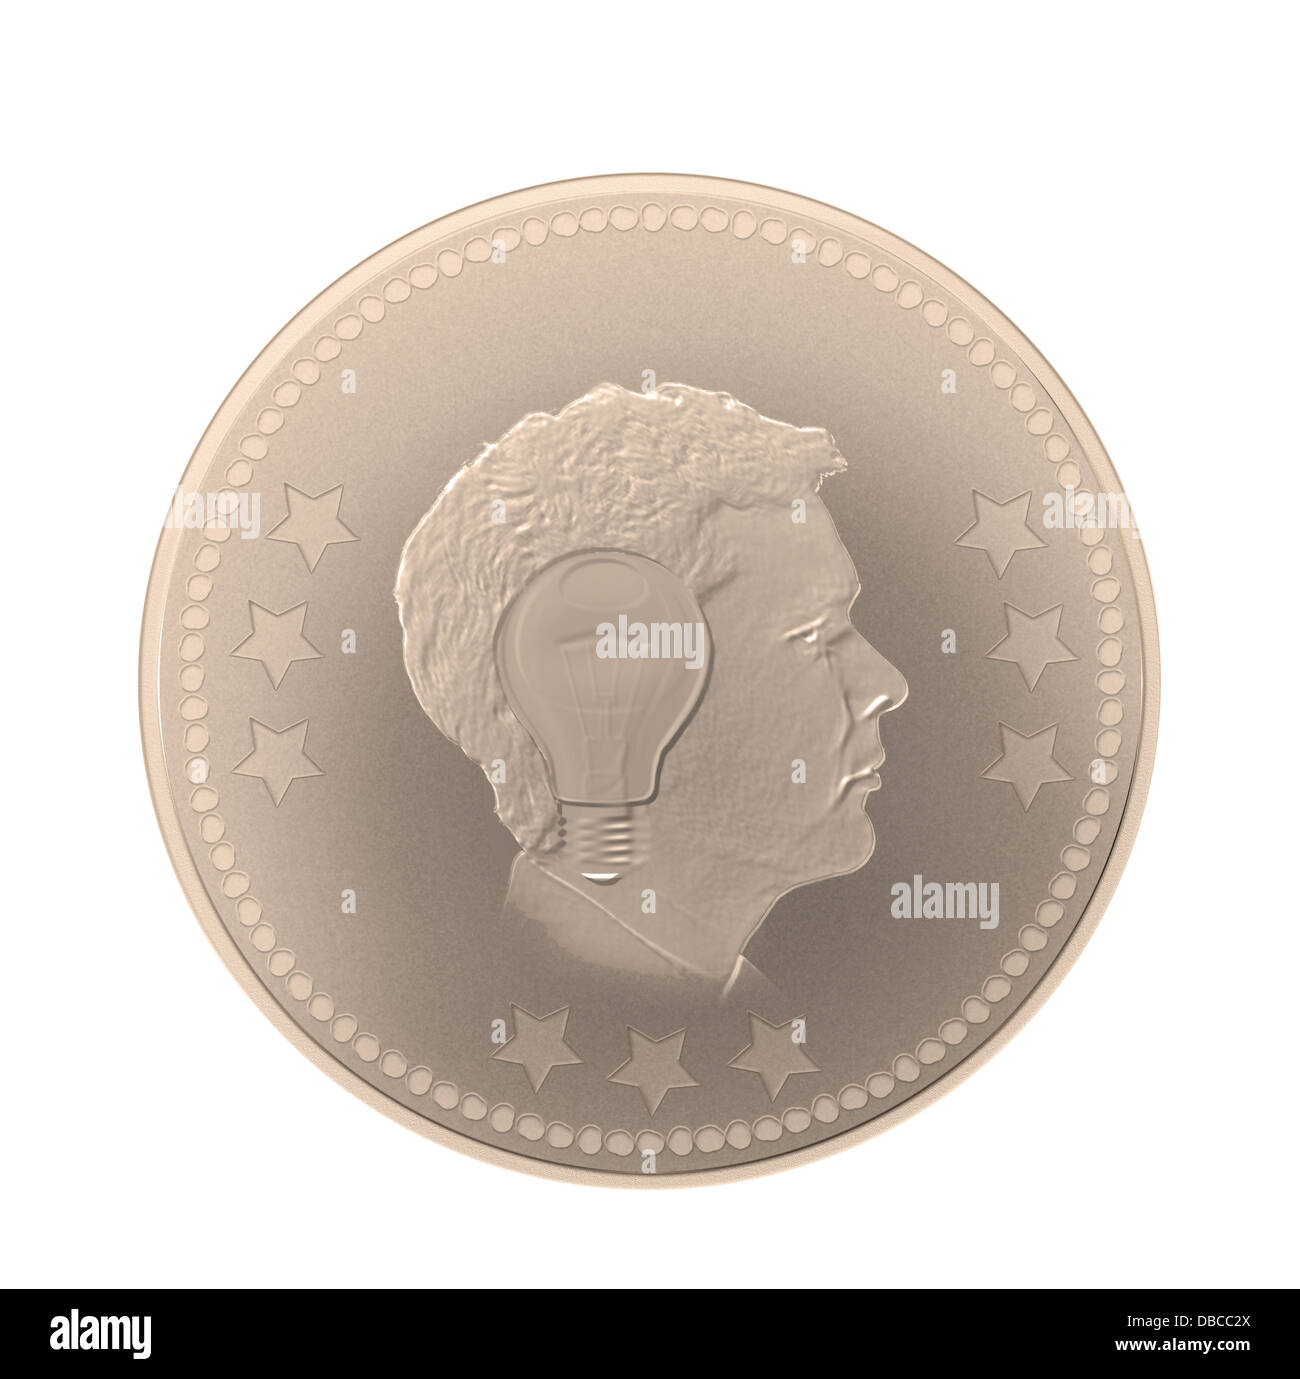 Illustrative image of man and bulb imprint on coin representing idea generation Stock Photo